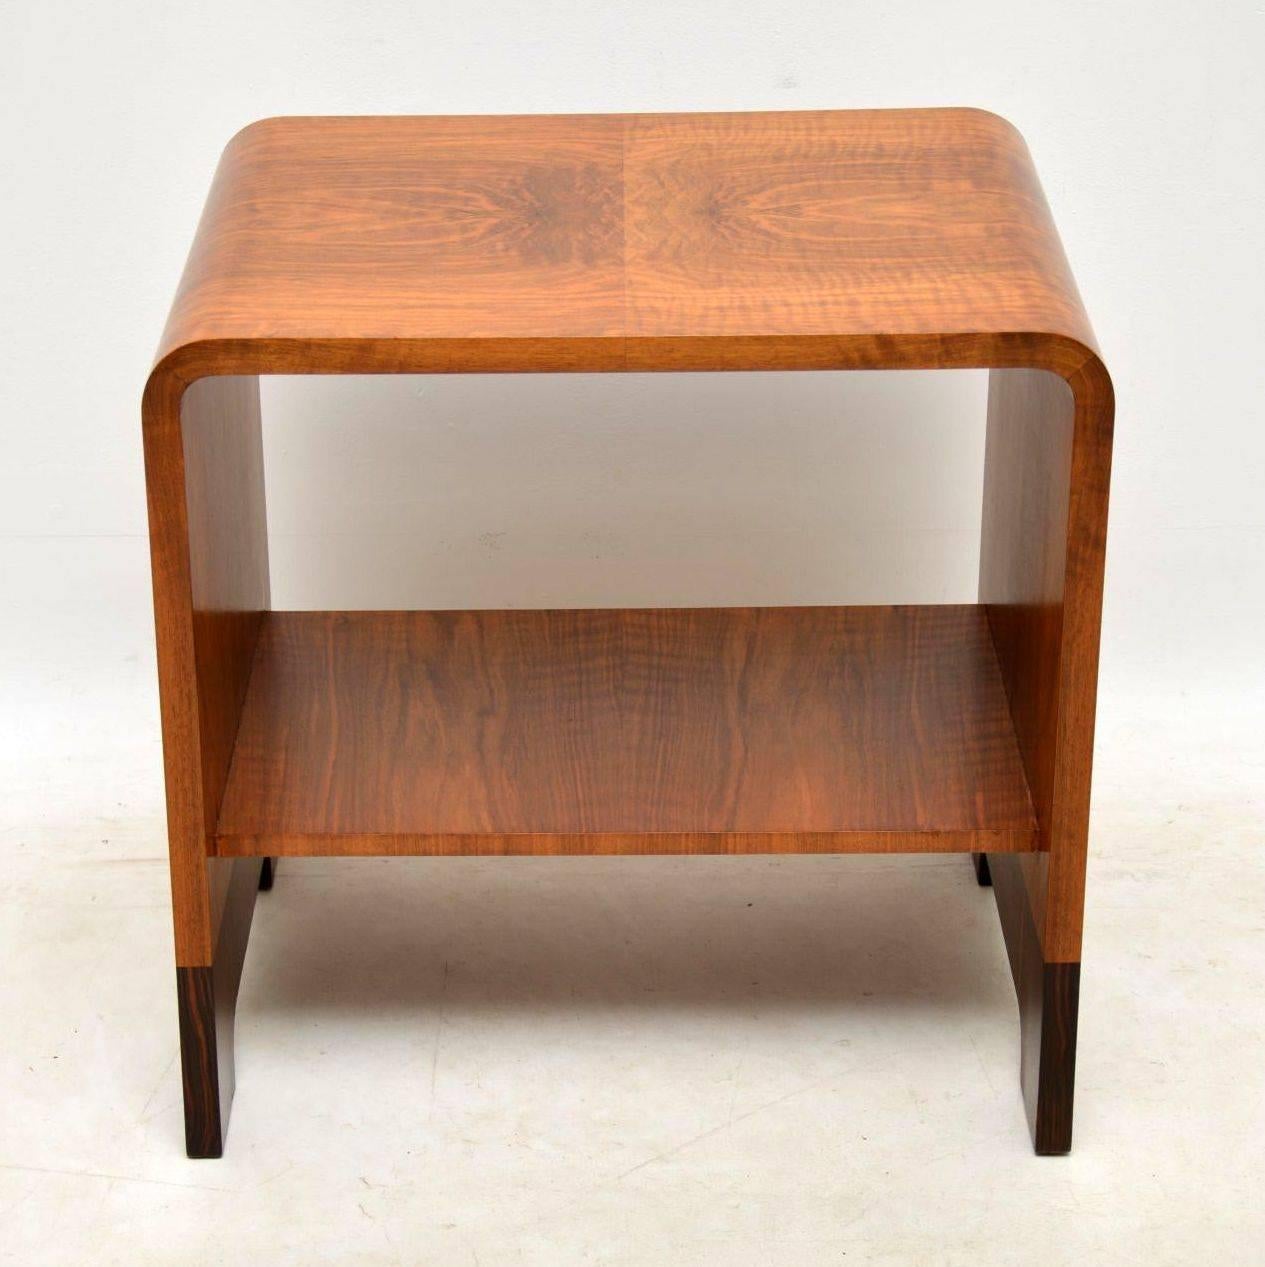 A beautiful and unusual original Art Deco coffee table in walnut, with a wood base. This dates from the 1920-30’s, it is of exceptional quality. We have had this fully stripped and re-polished, the condition is superb throughout.

Width – 62